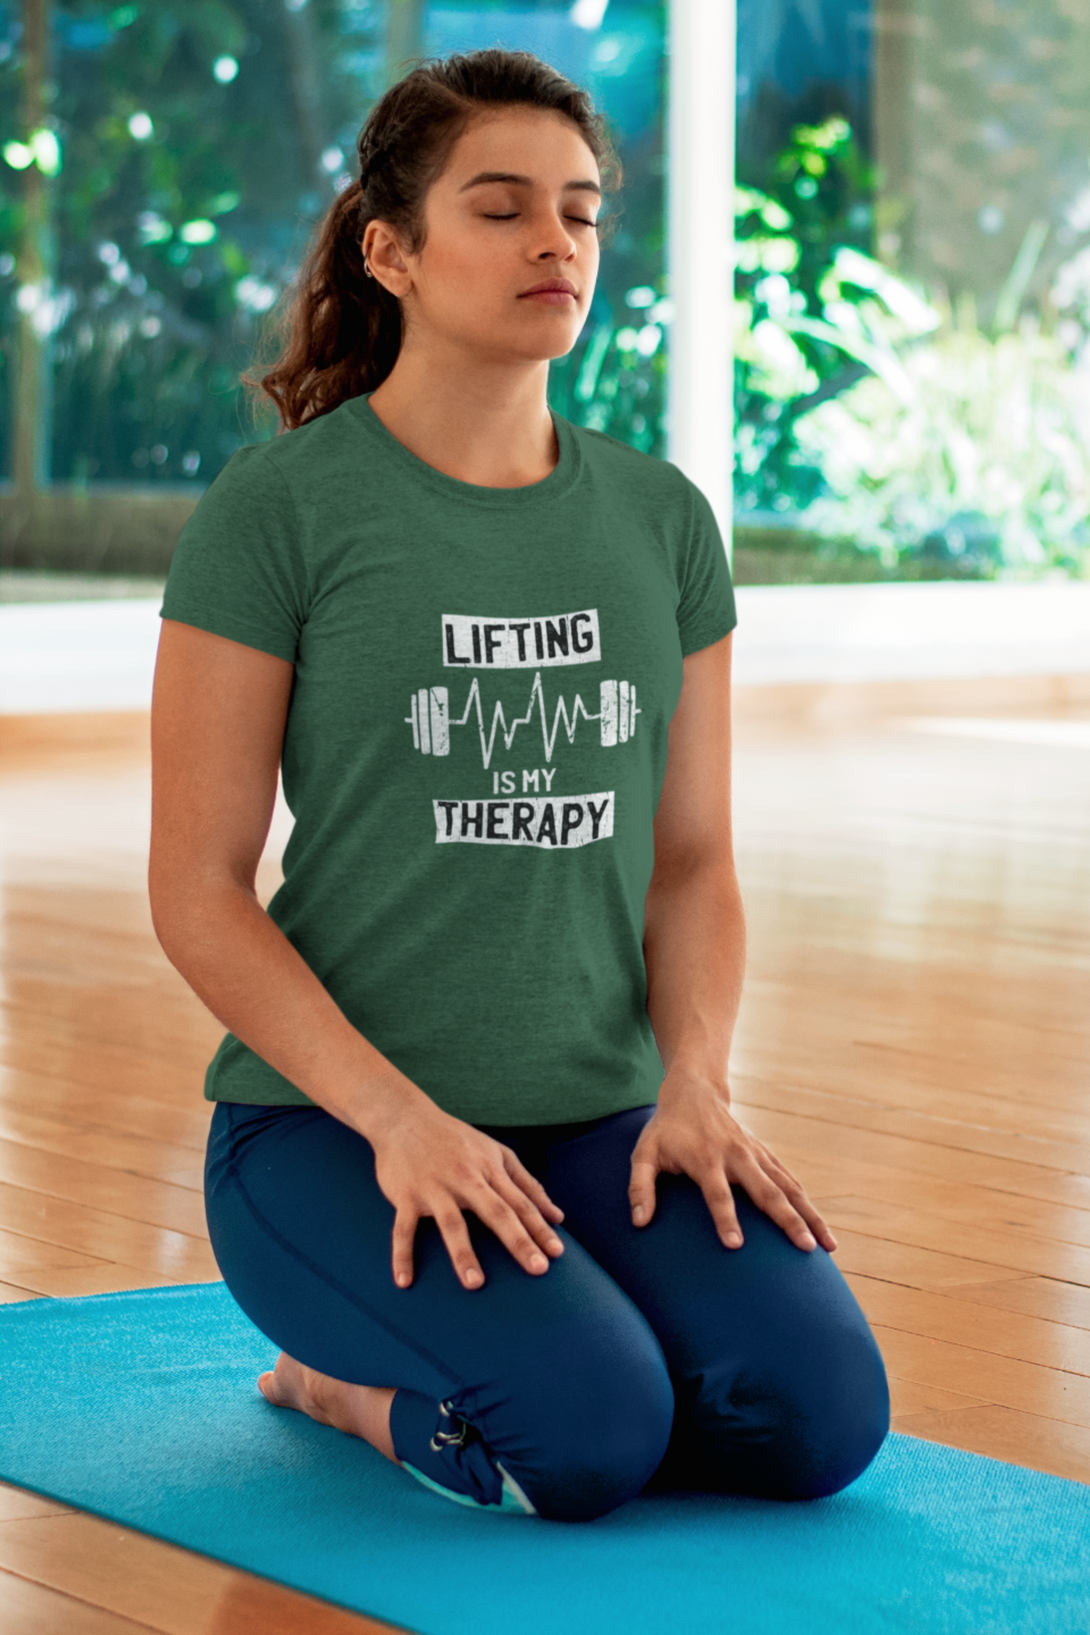 Lifting Is My Therapy Printed T-Shirt For Women - WowWaves - 2